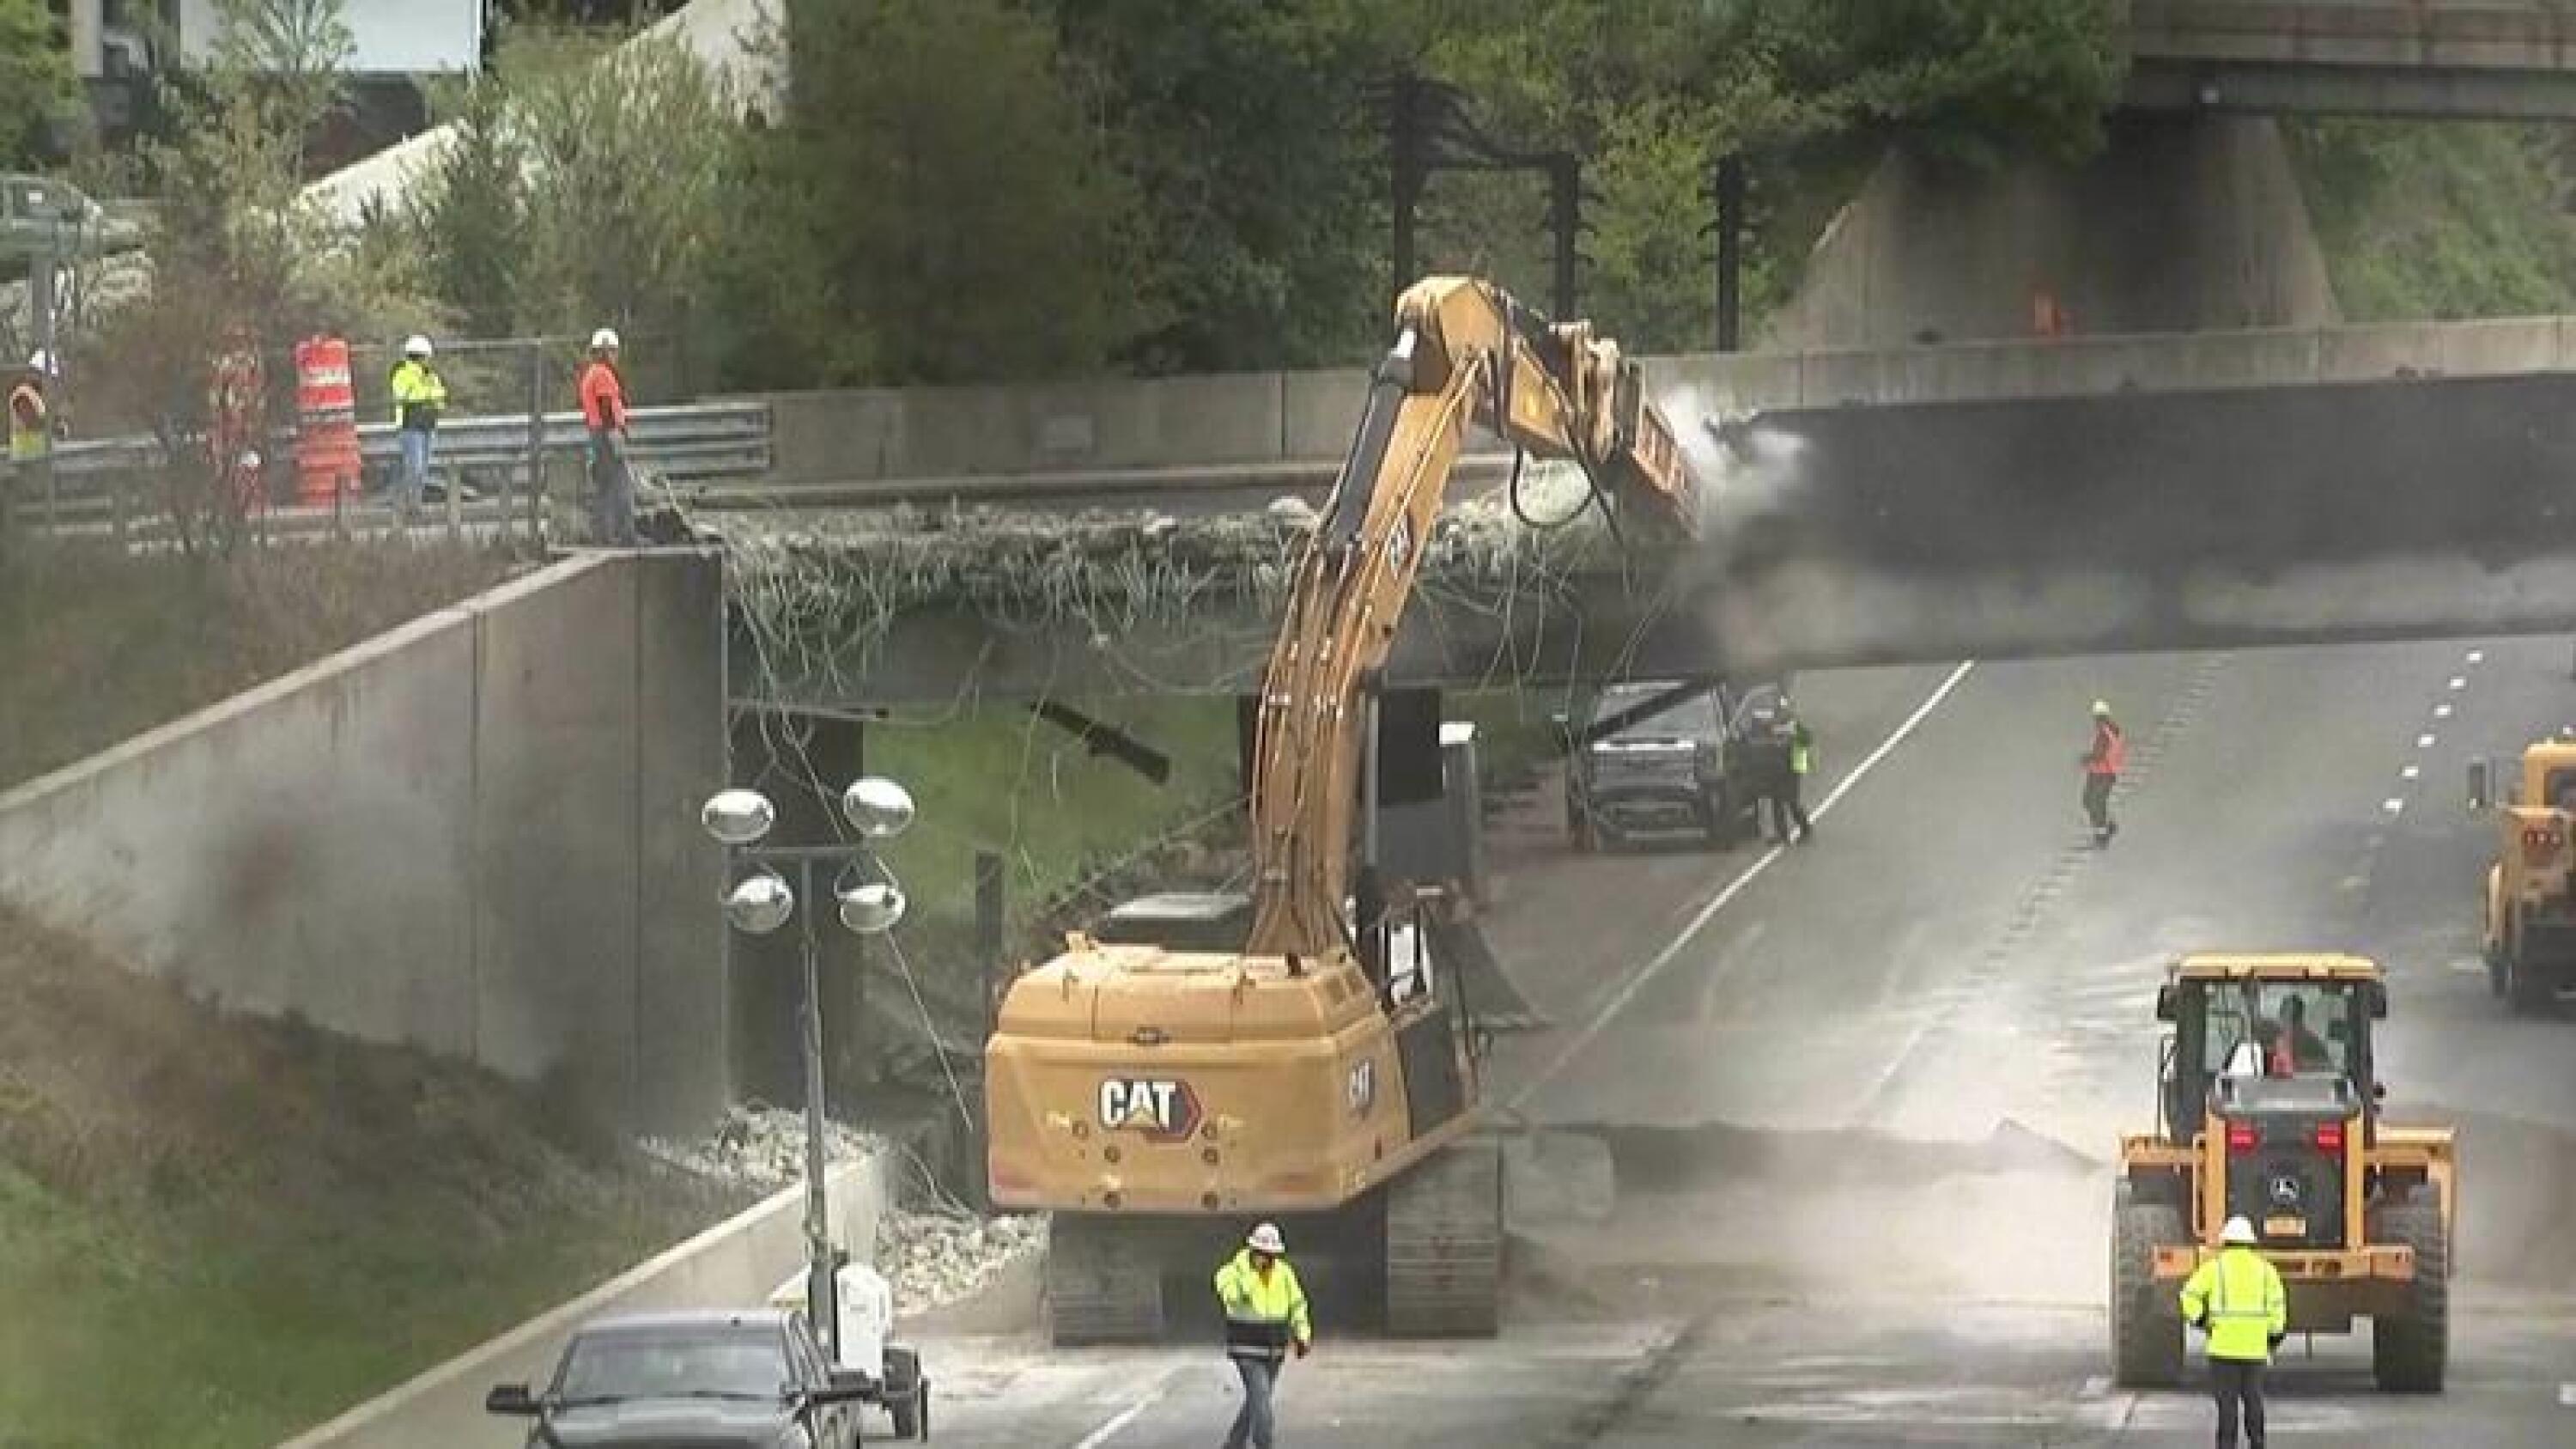 Traffic snarled as workers begin removing I-95 overpass burned in Conn. fuel truck inferno